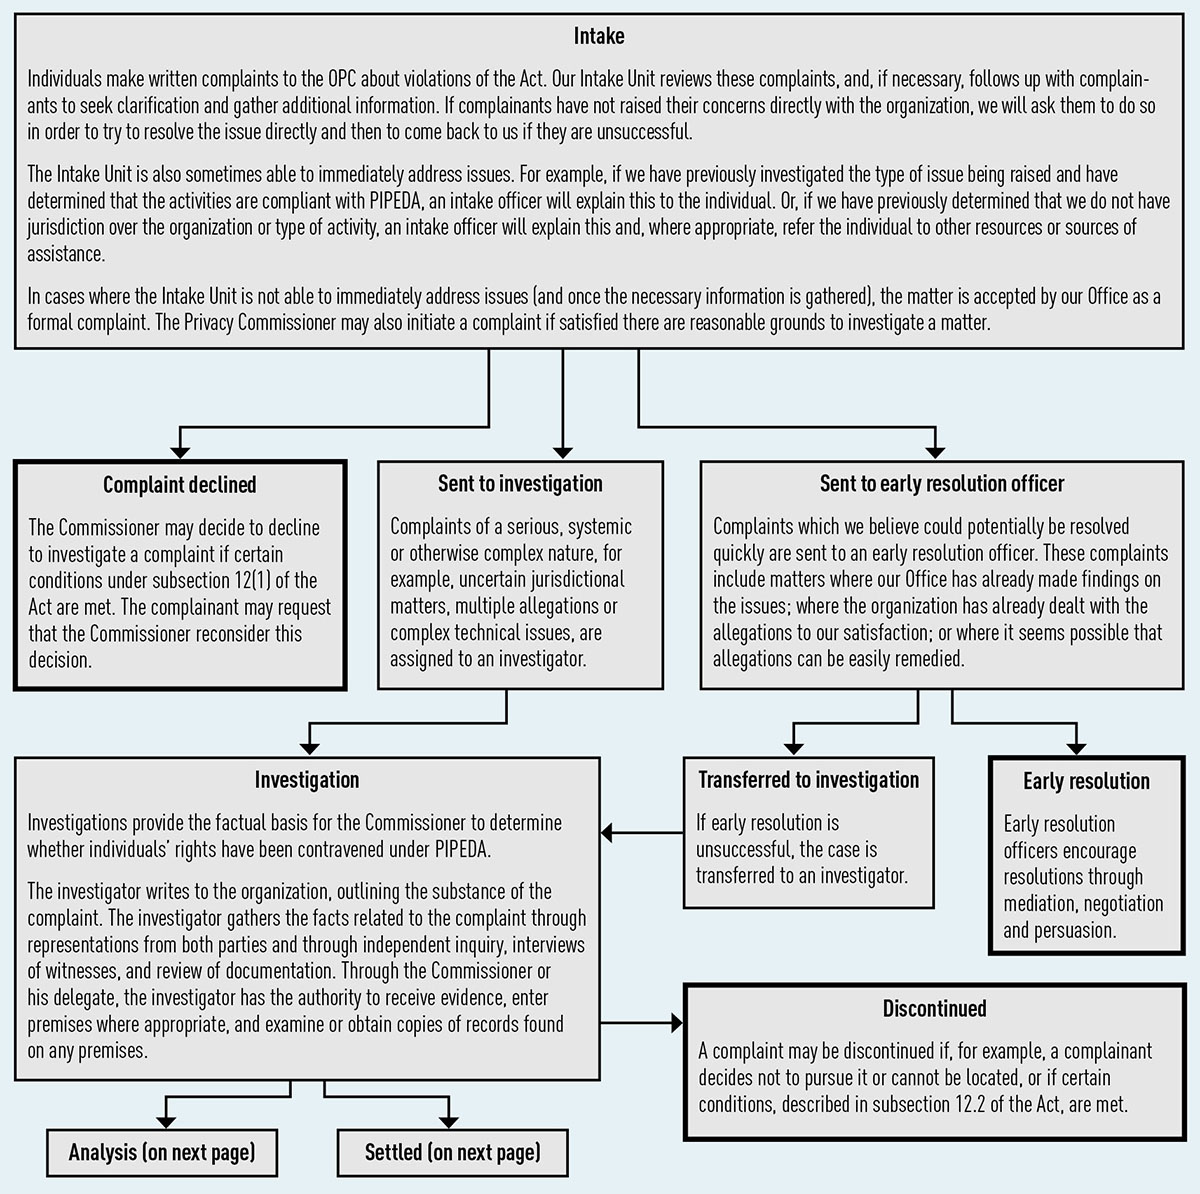 Figure 1: PIPEDA investigation process: see text version.